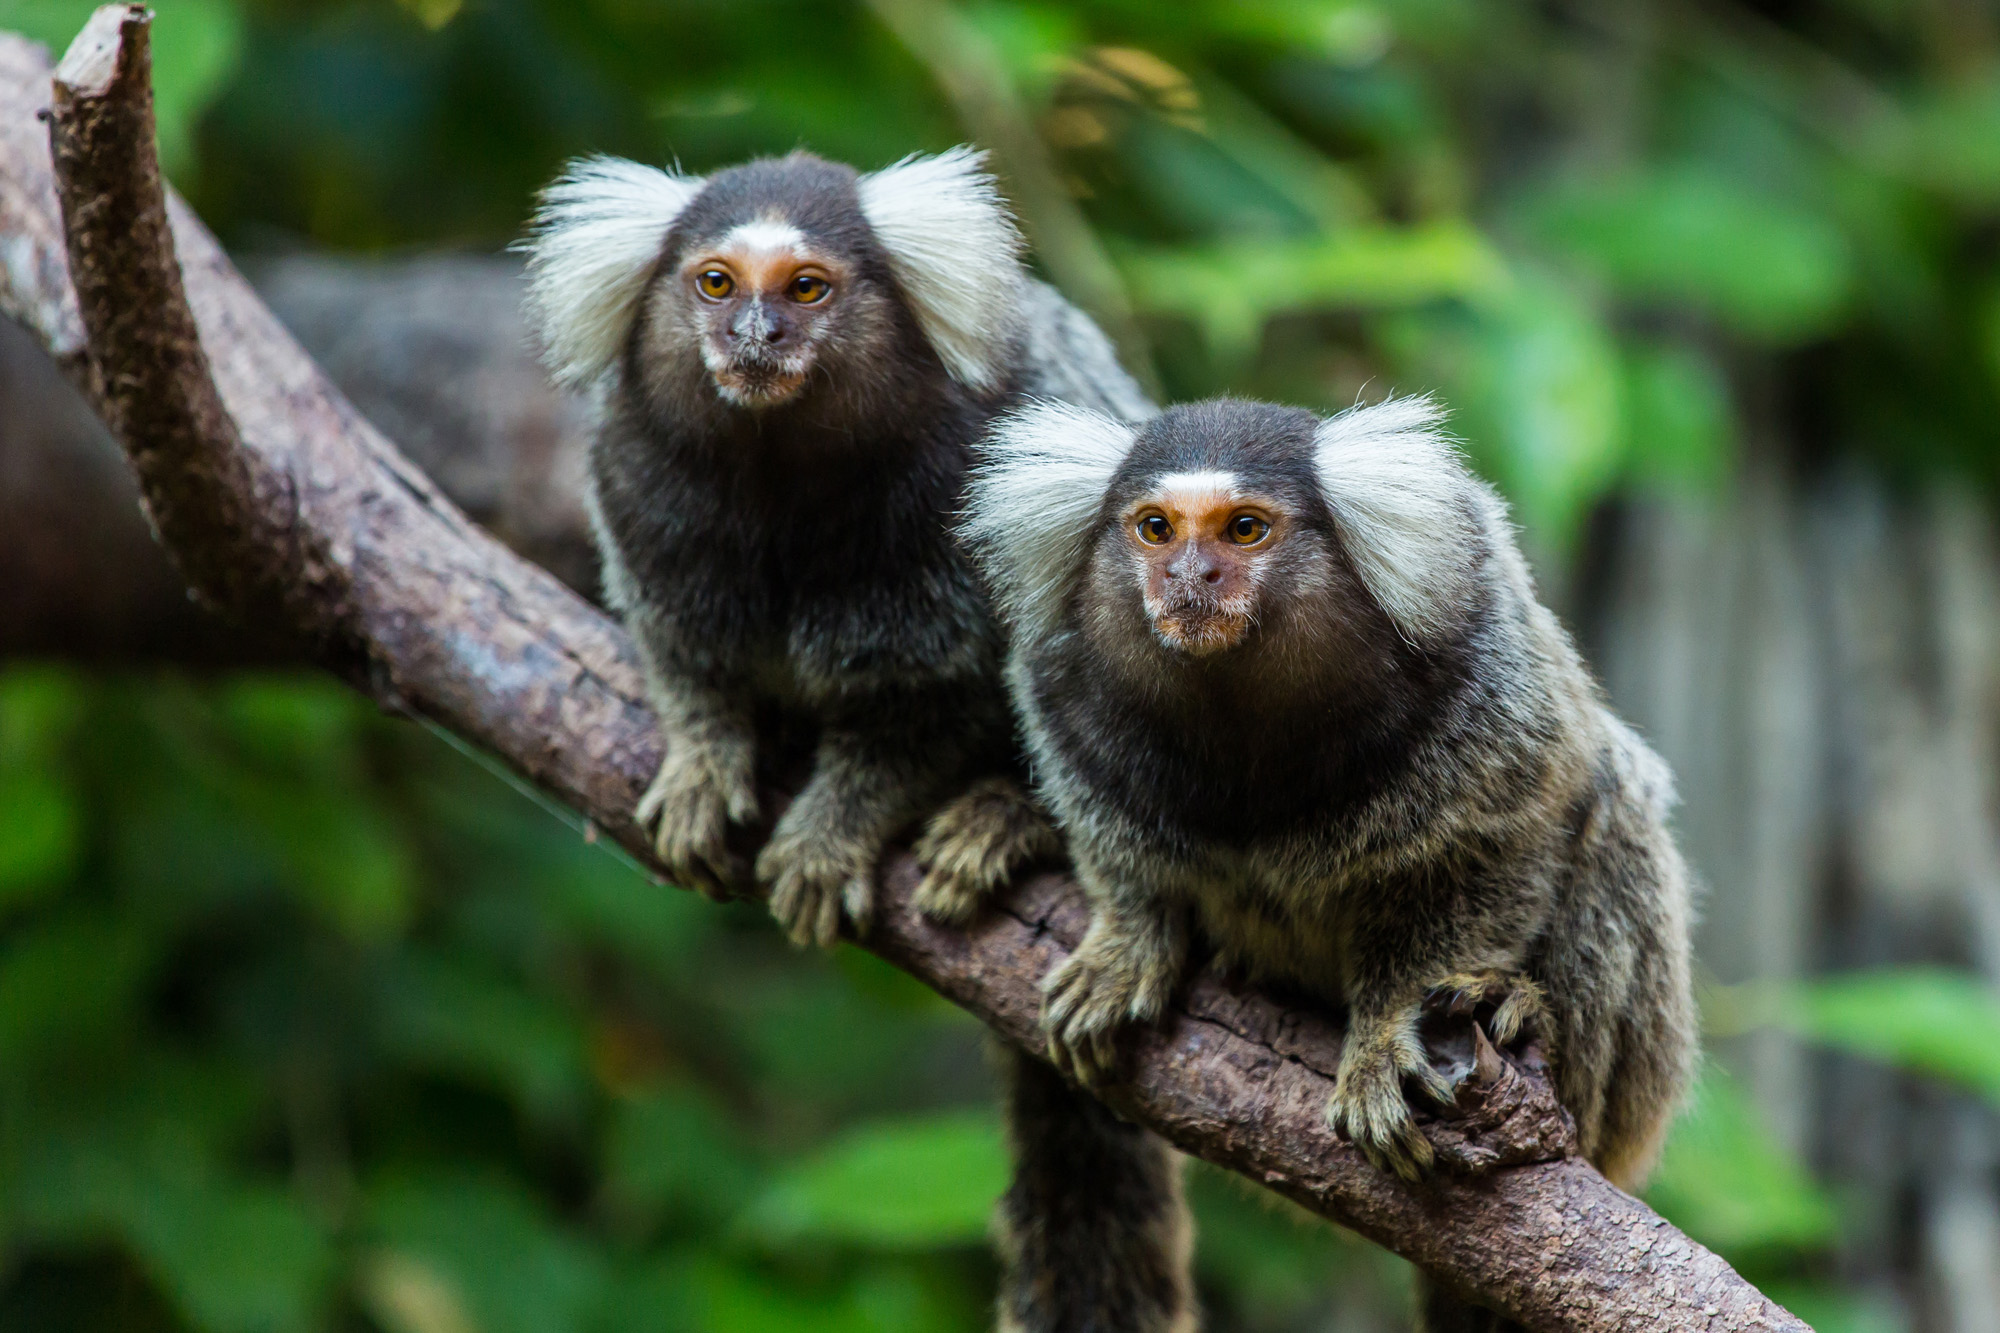 pair of marmosets sitting on a branch